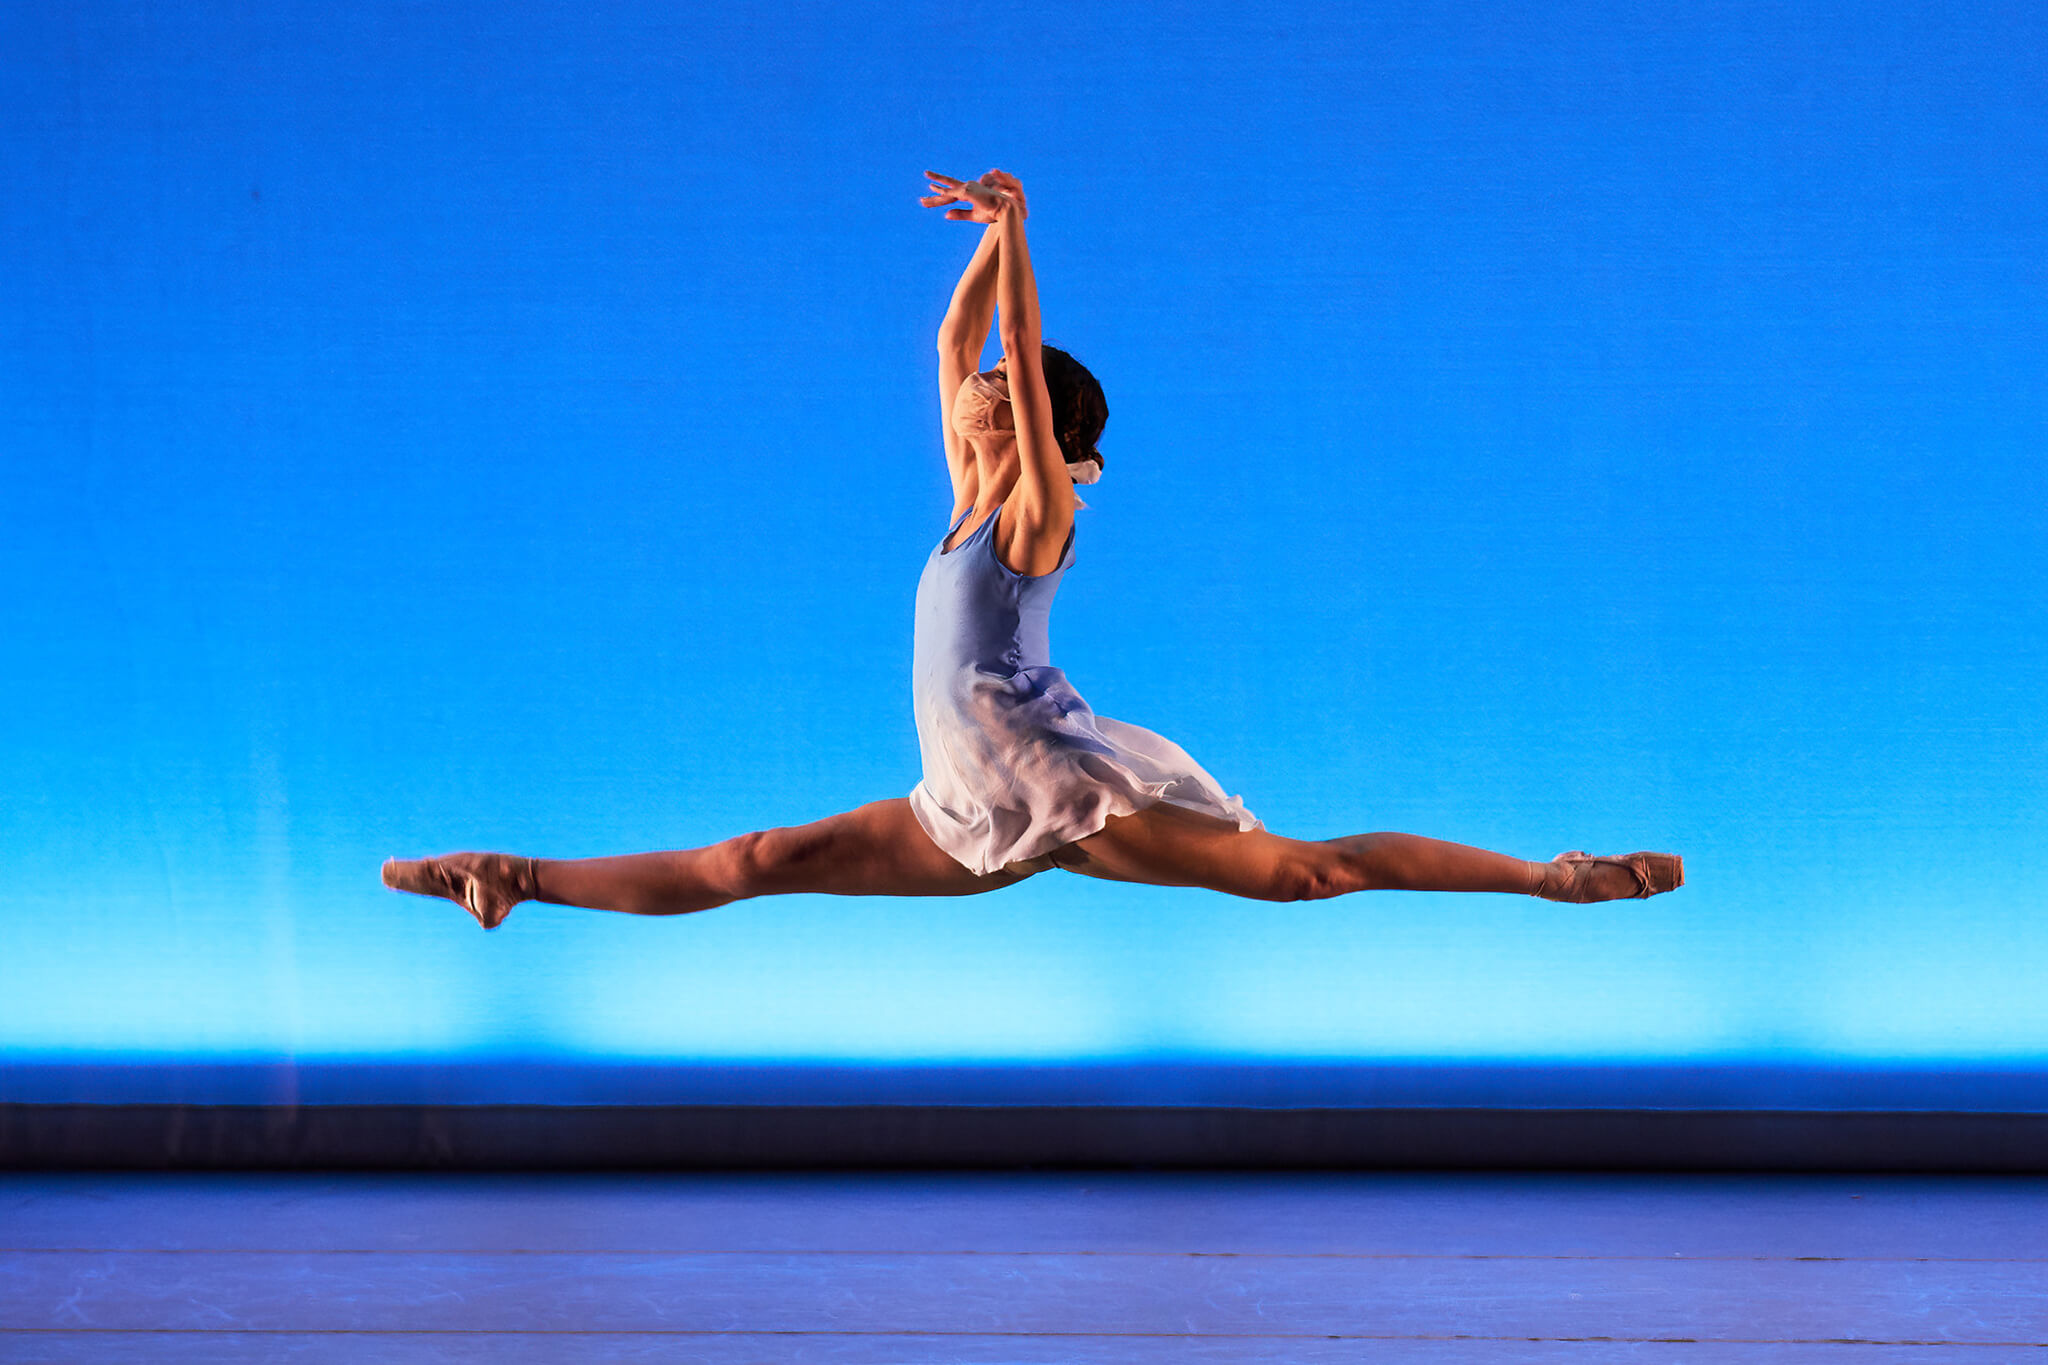 Dancer in white costume against a blue background jumping